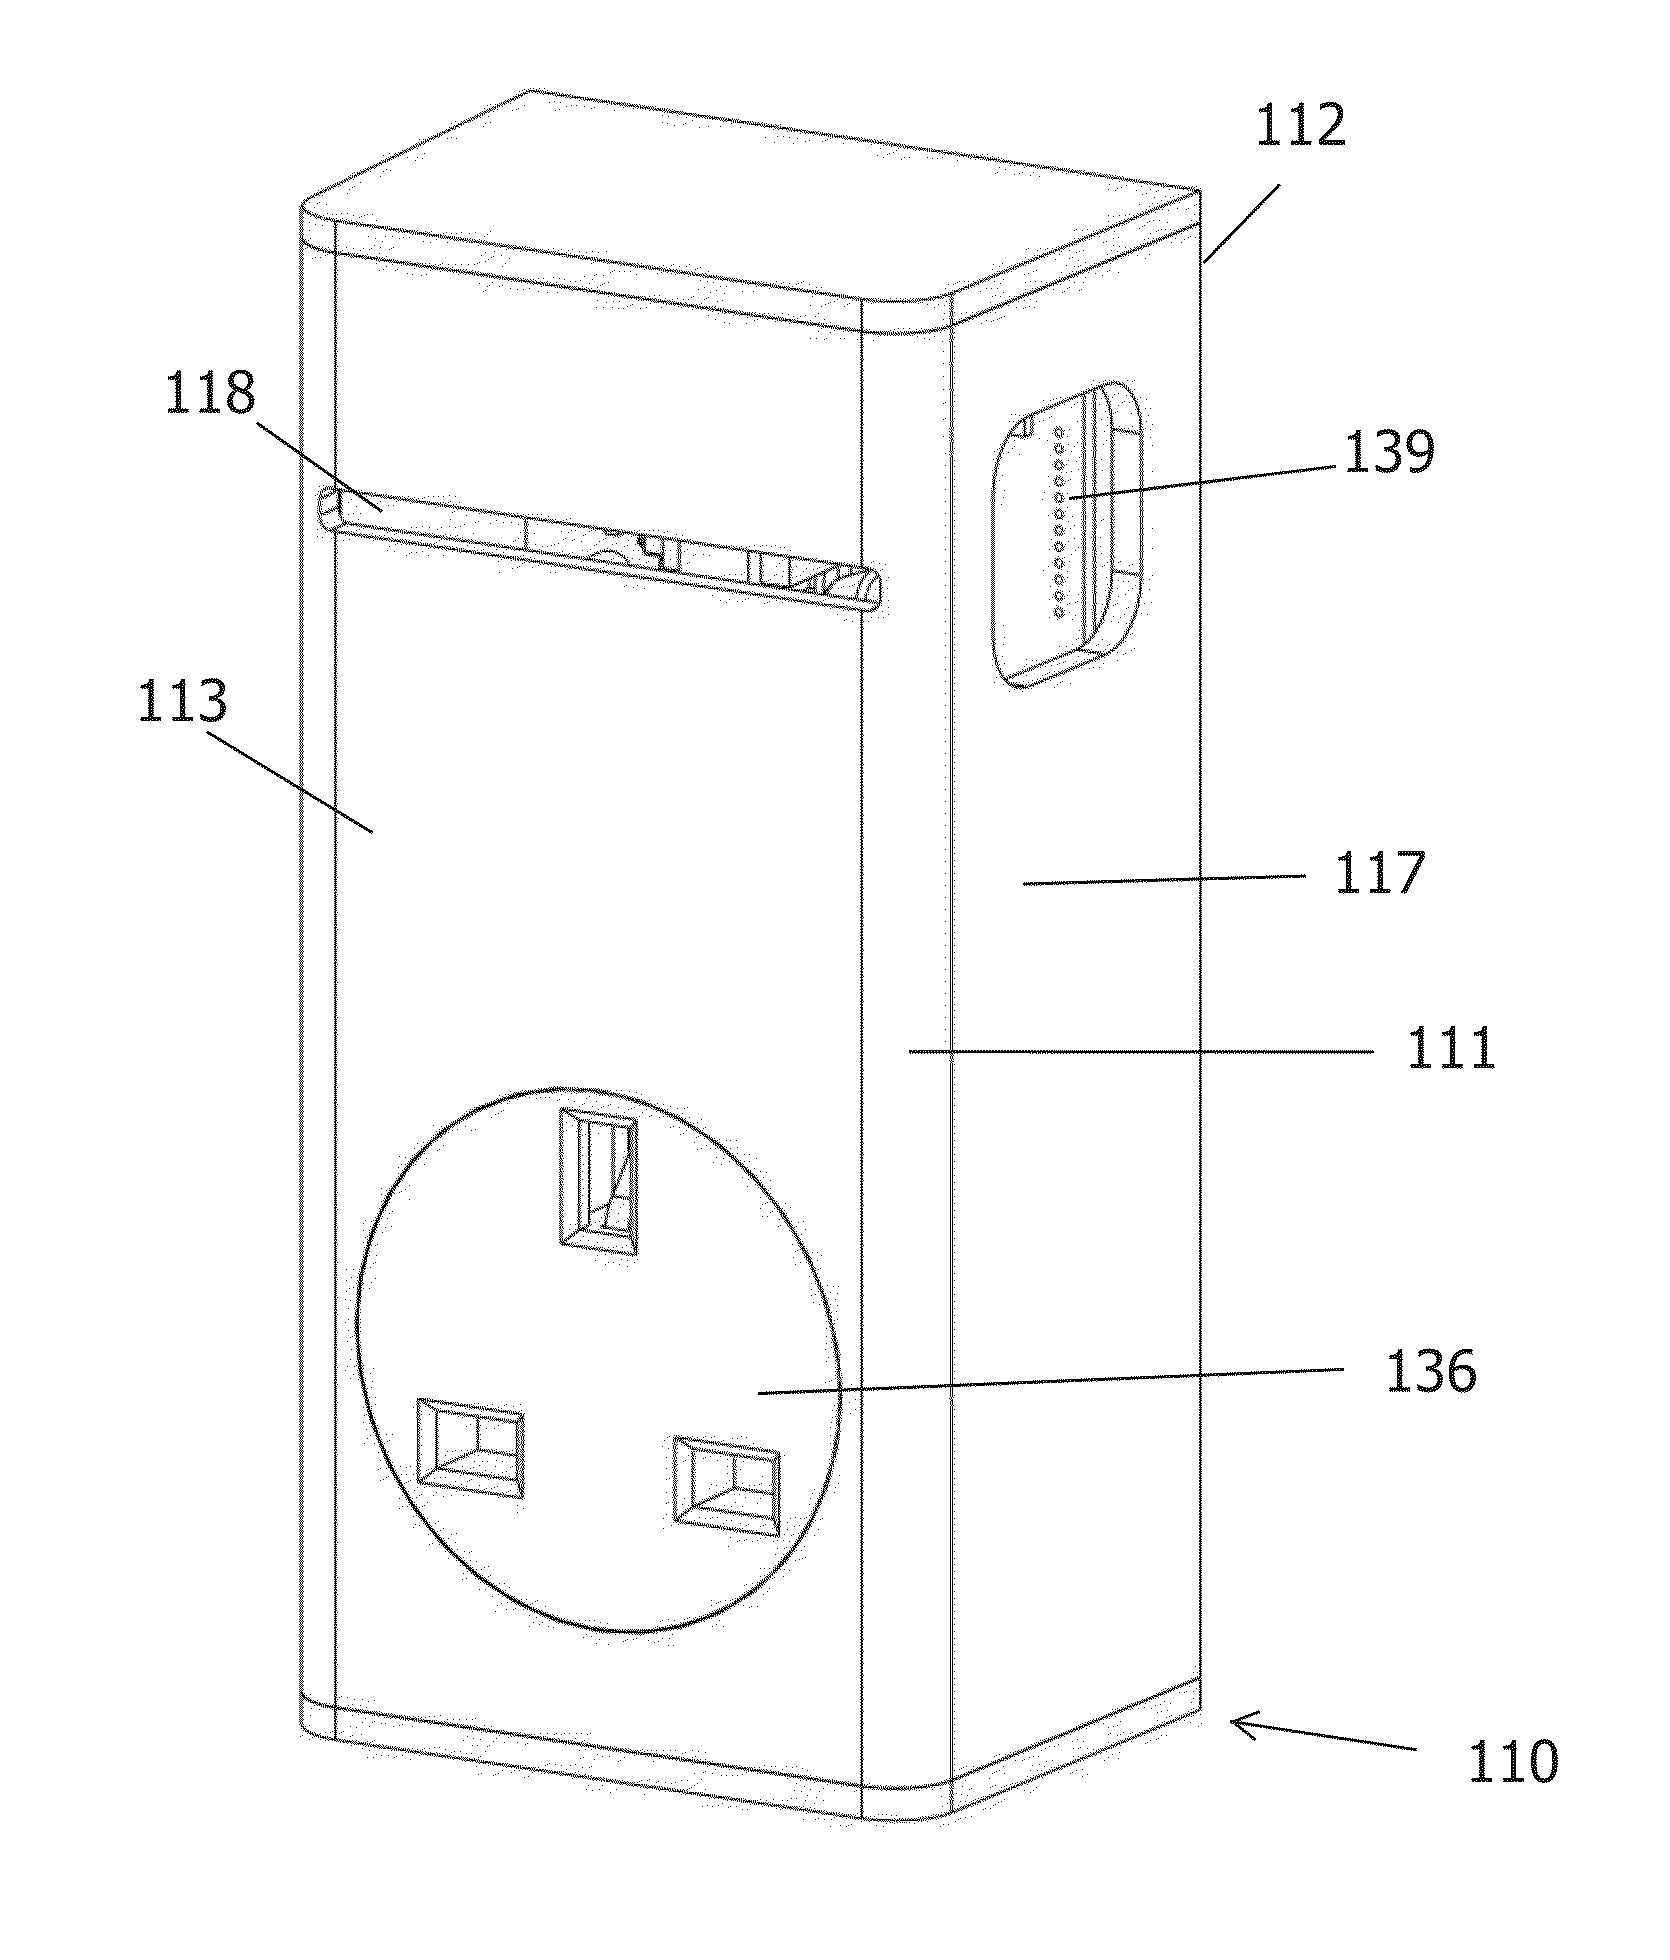 Multifunction pass-through wall power plug with communication relay and related method